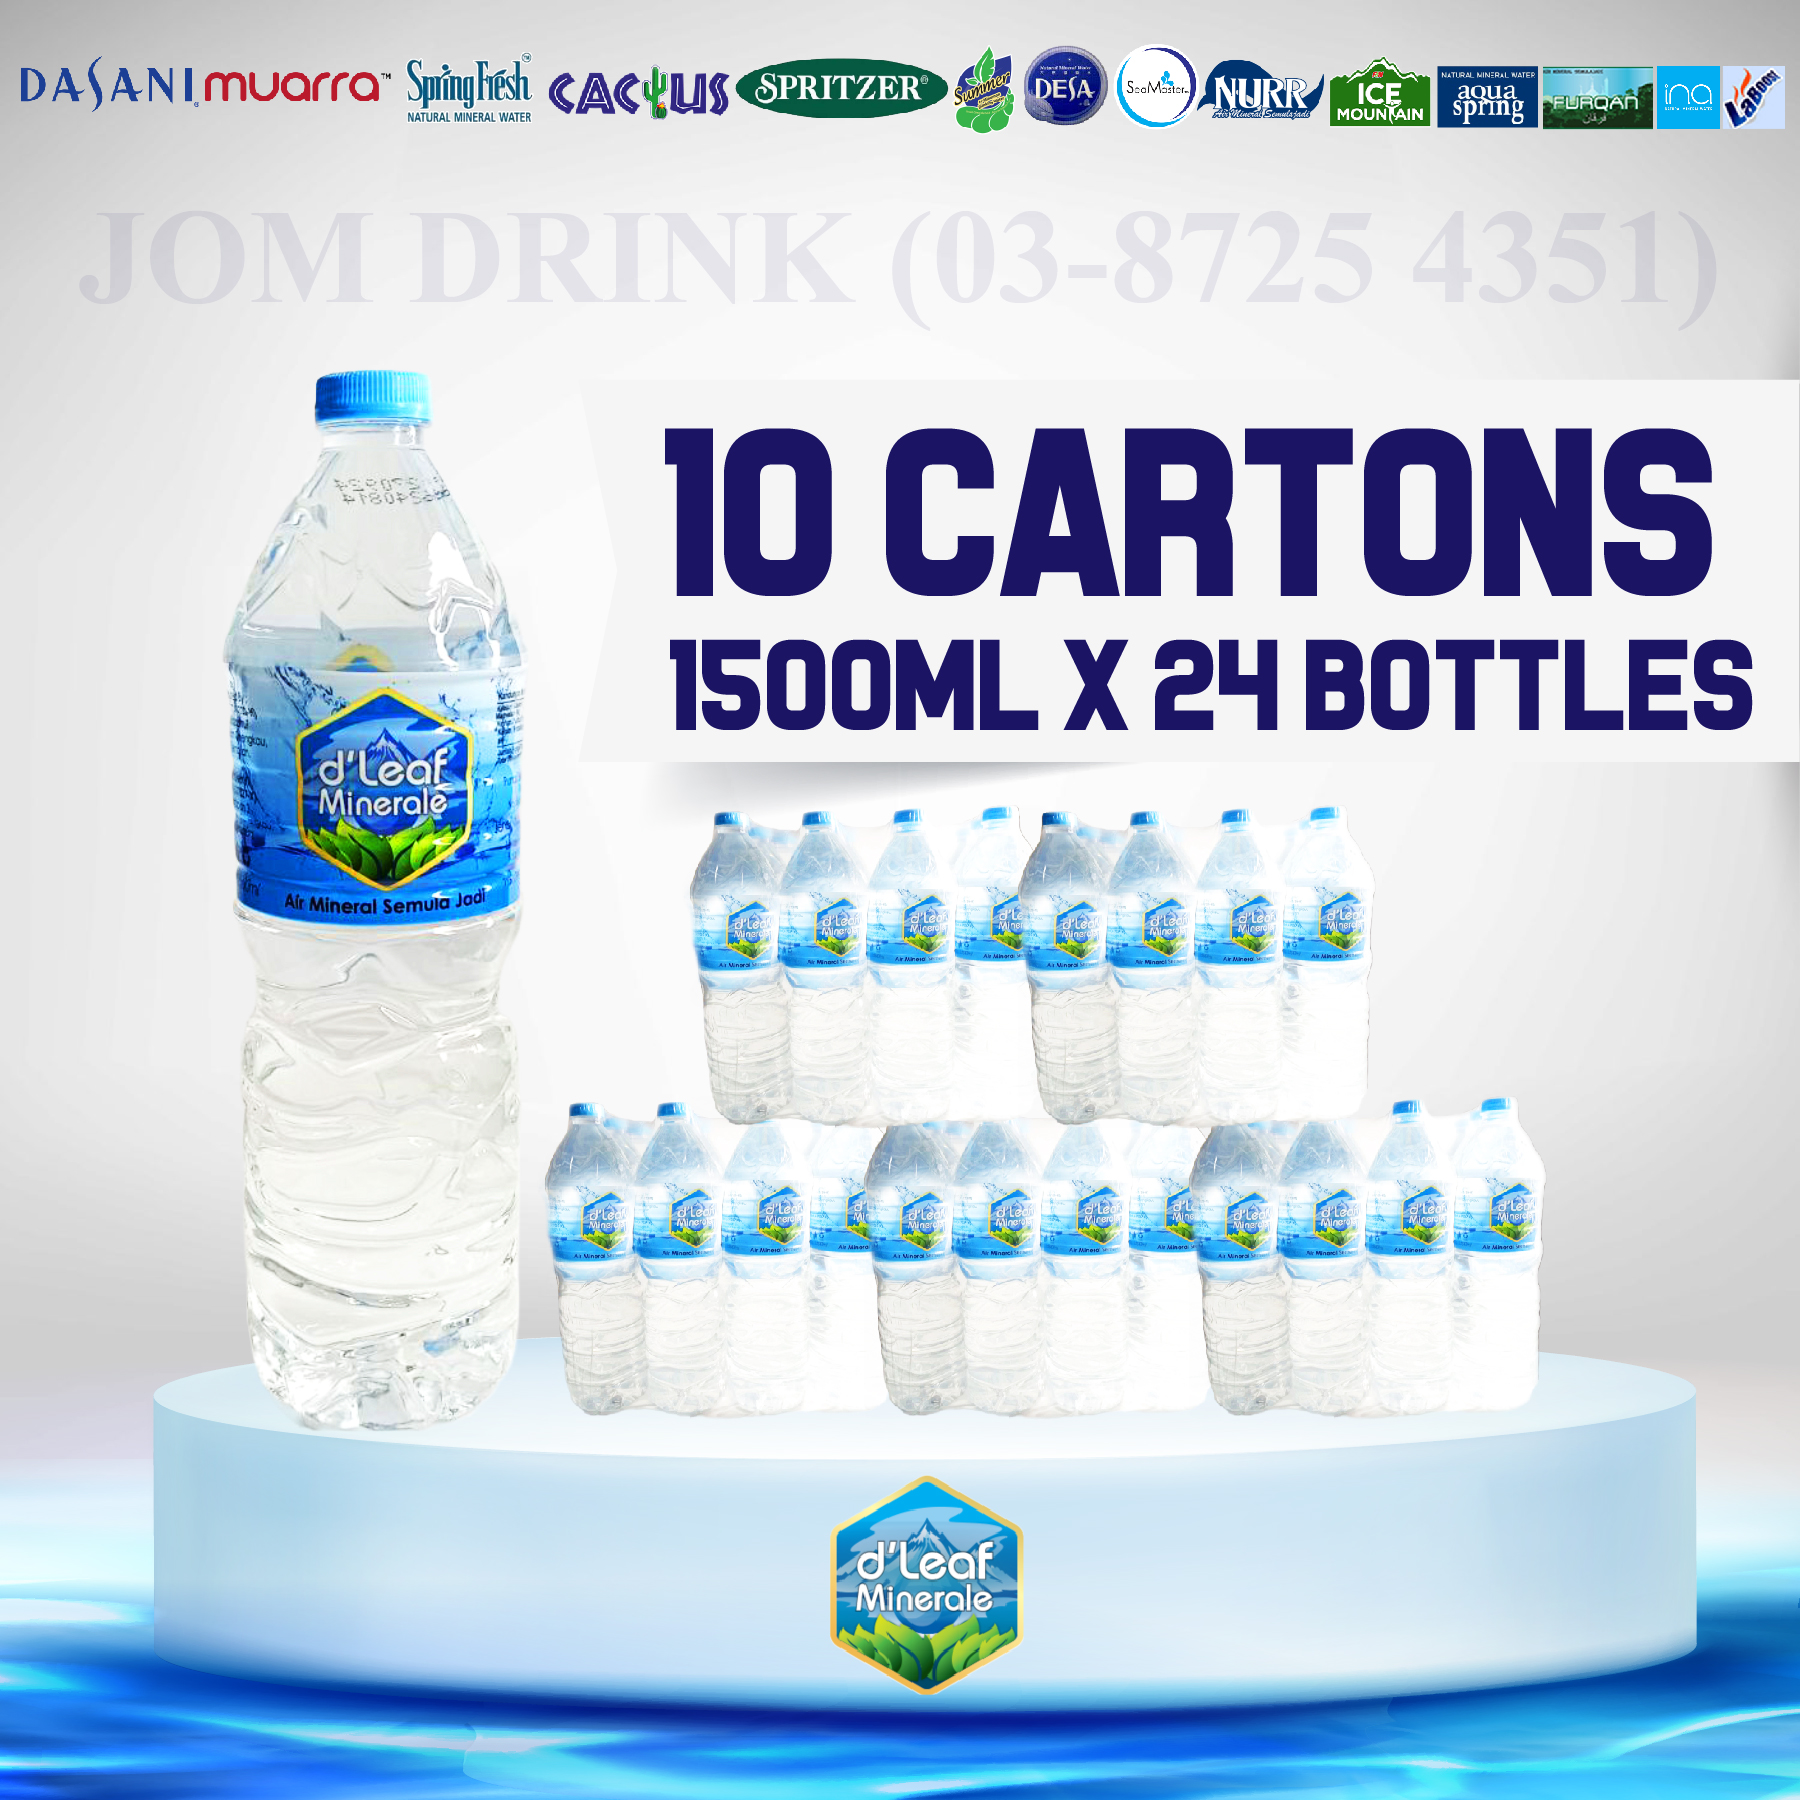 PACKAGES OF 10 BOXES : D’LEAF MINERALE MINERAL WATER 1500ML